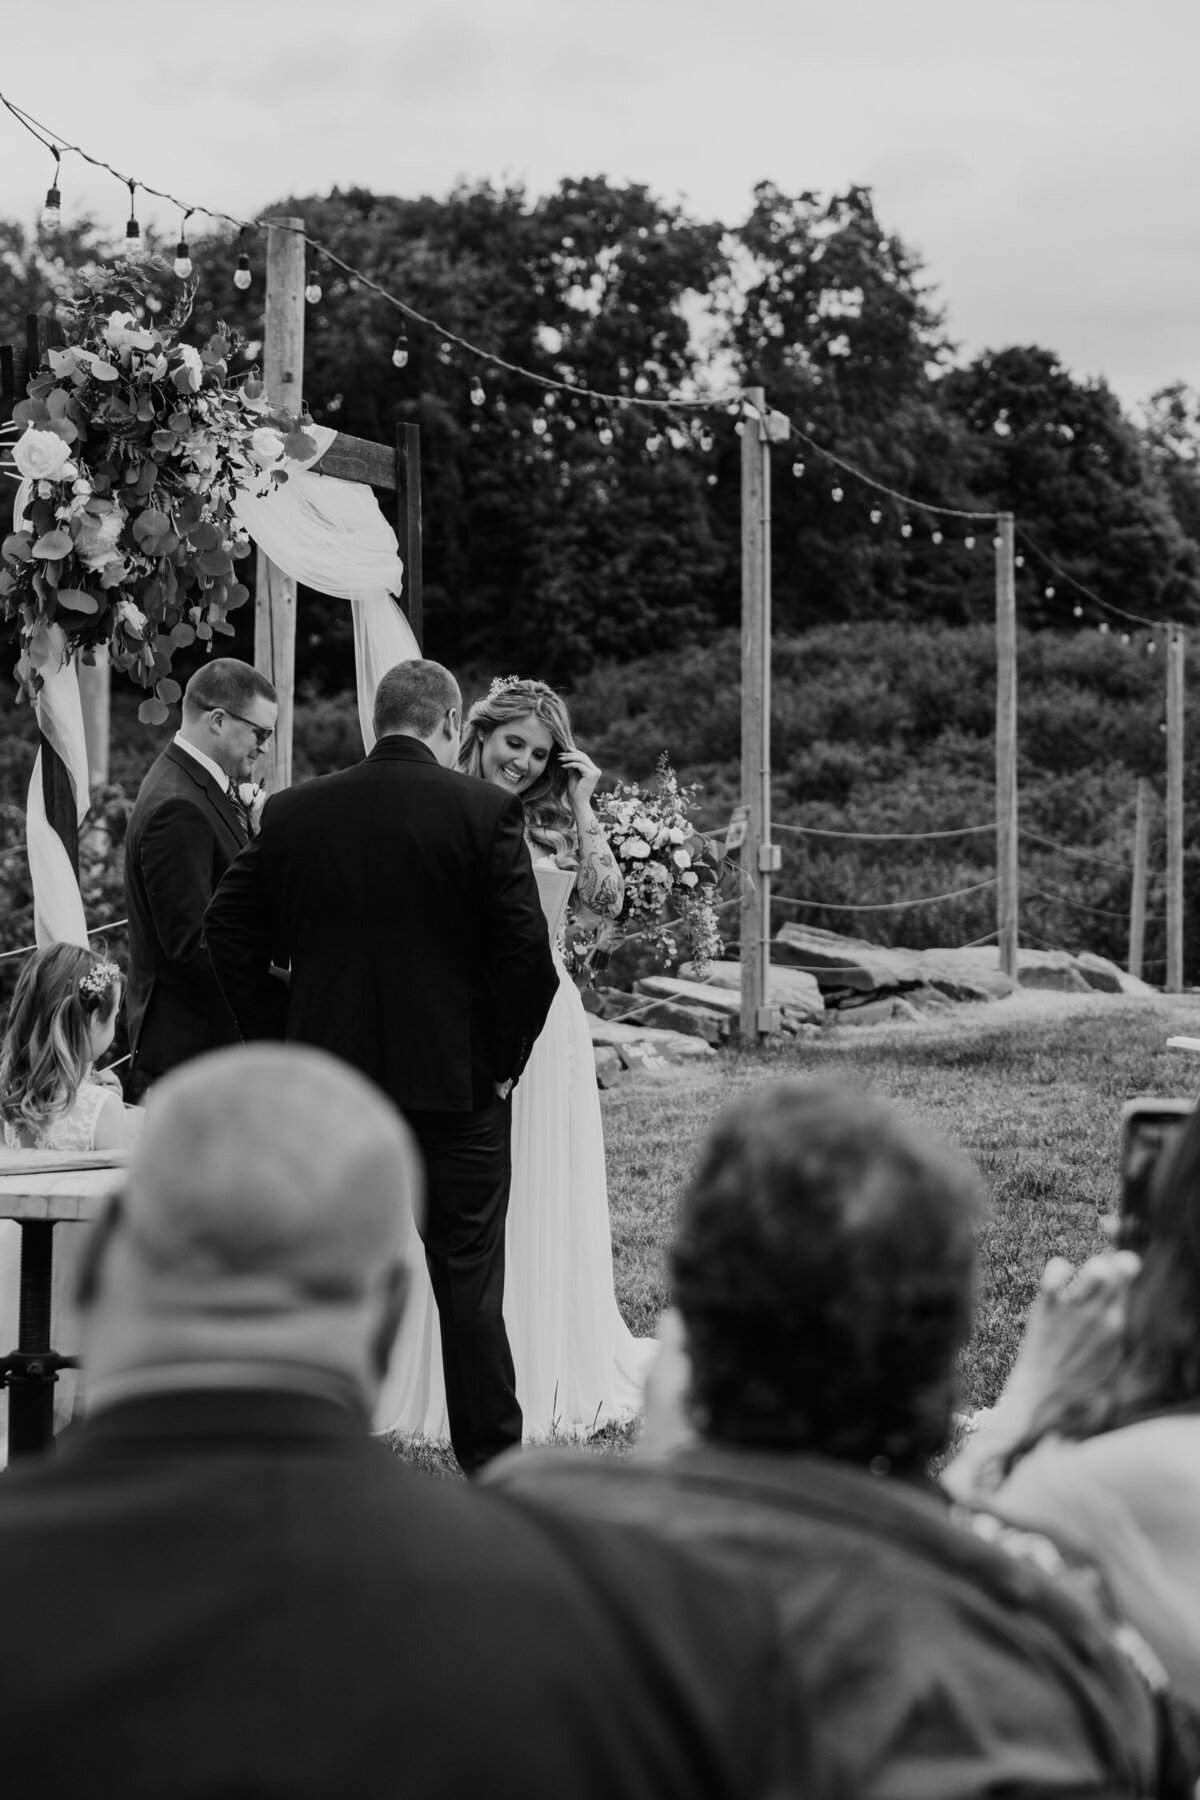 A Hudson Valley wedding photographer captures a tender moment at Locust Grove Brewery with a bride and groom exchanging vows under a wooden pergola, adorned with flowers and string lights.